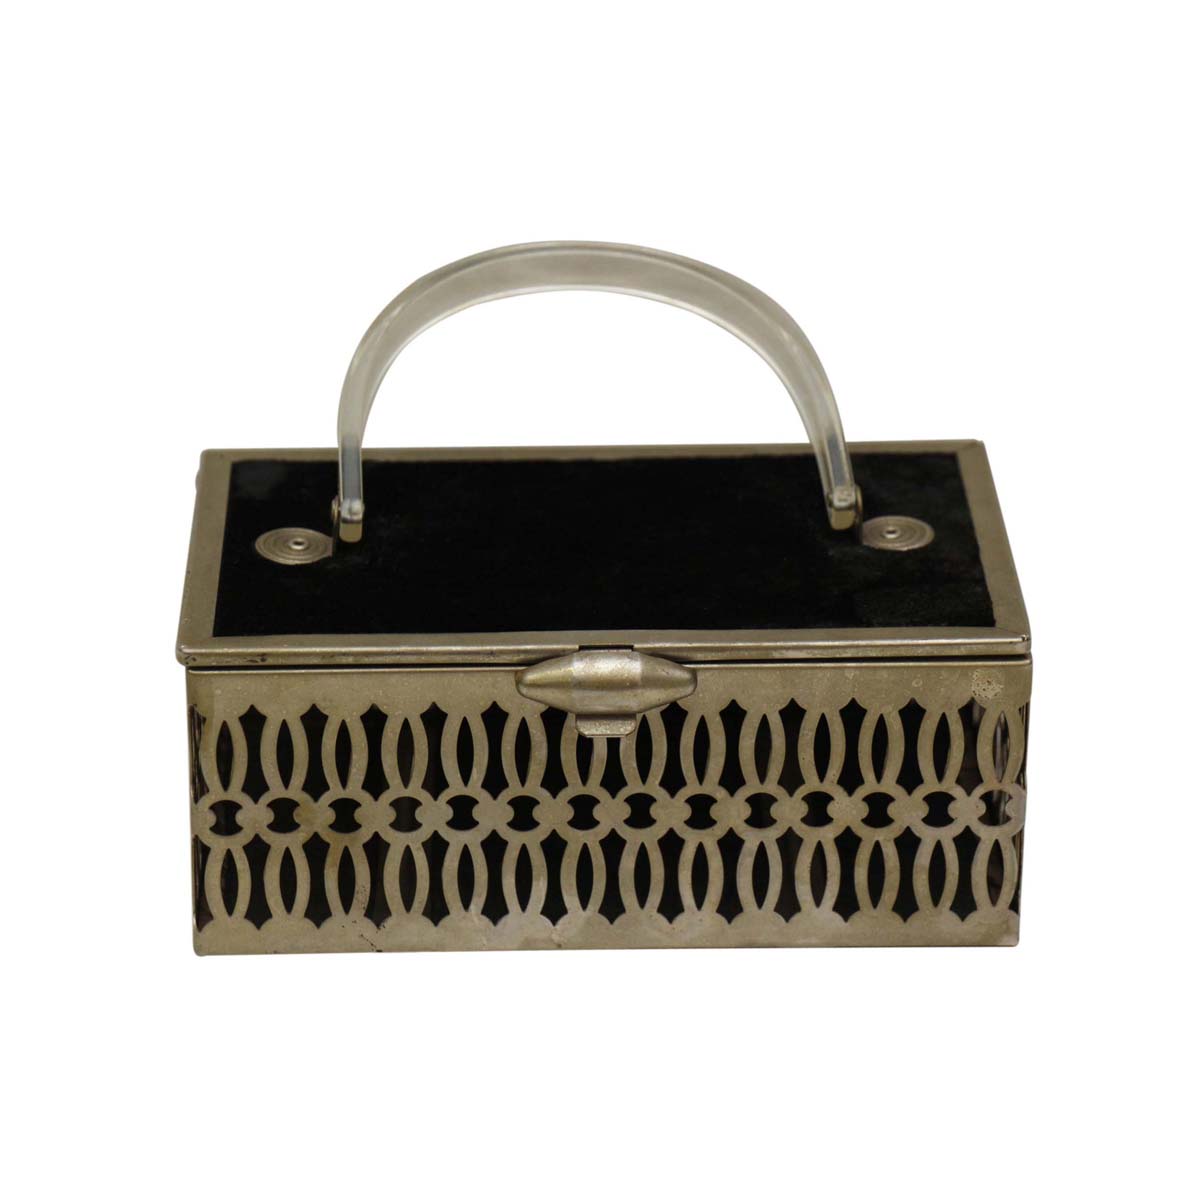 80s Gold Metal Minaudiere Box Purse - Lucky Vintage